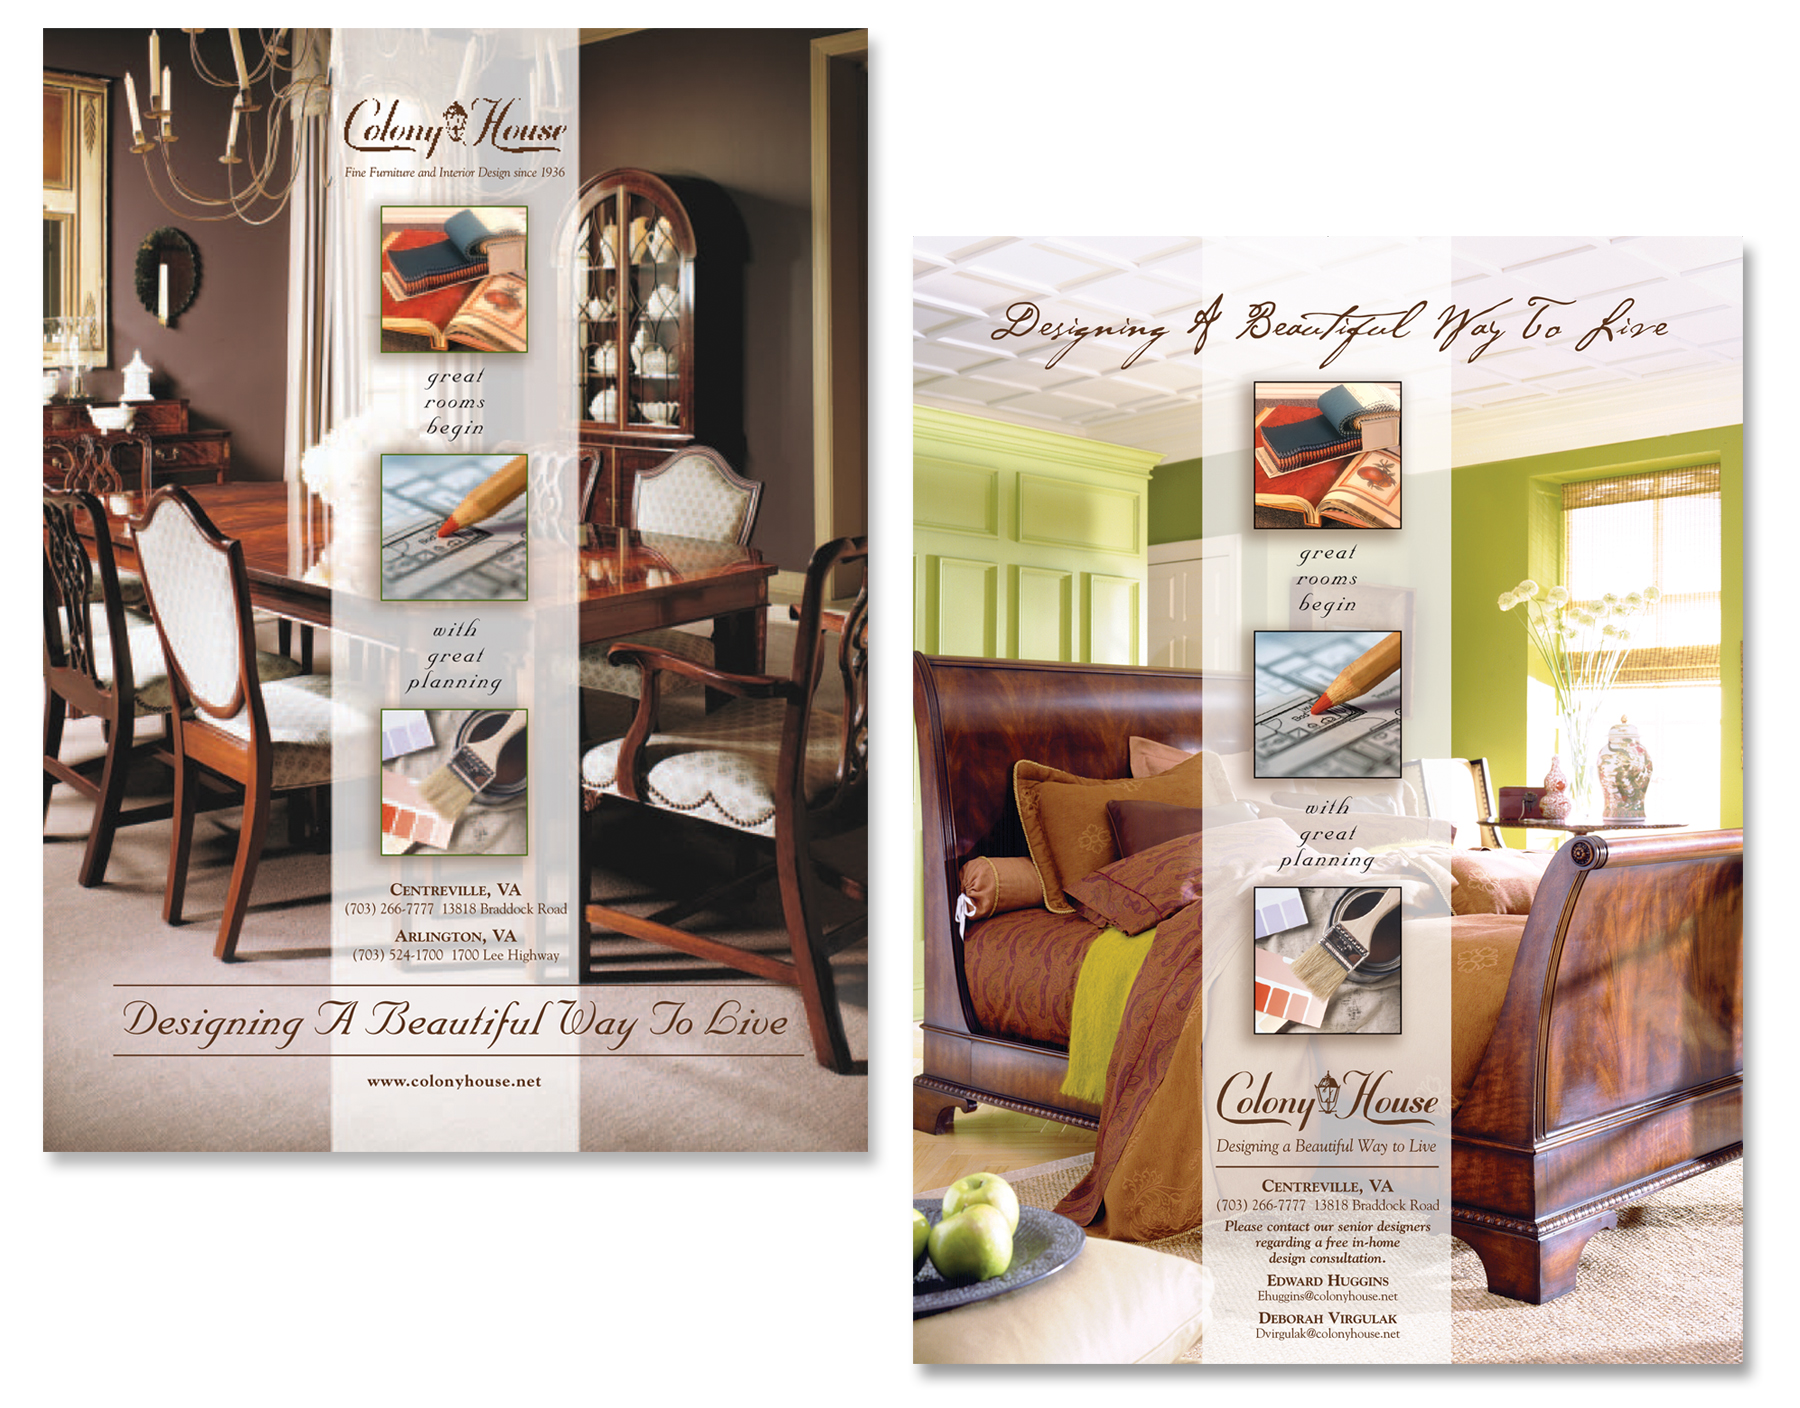 Colony House Furniture Advertising Campaign